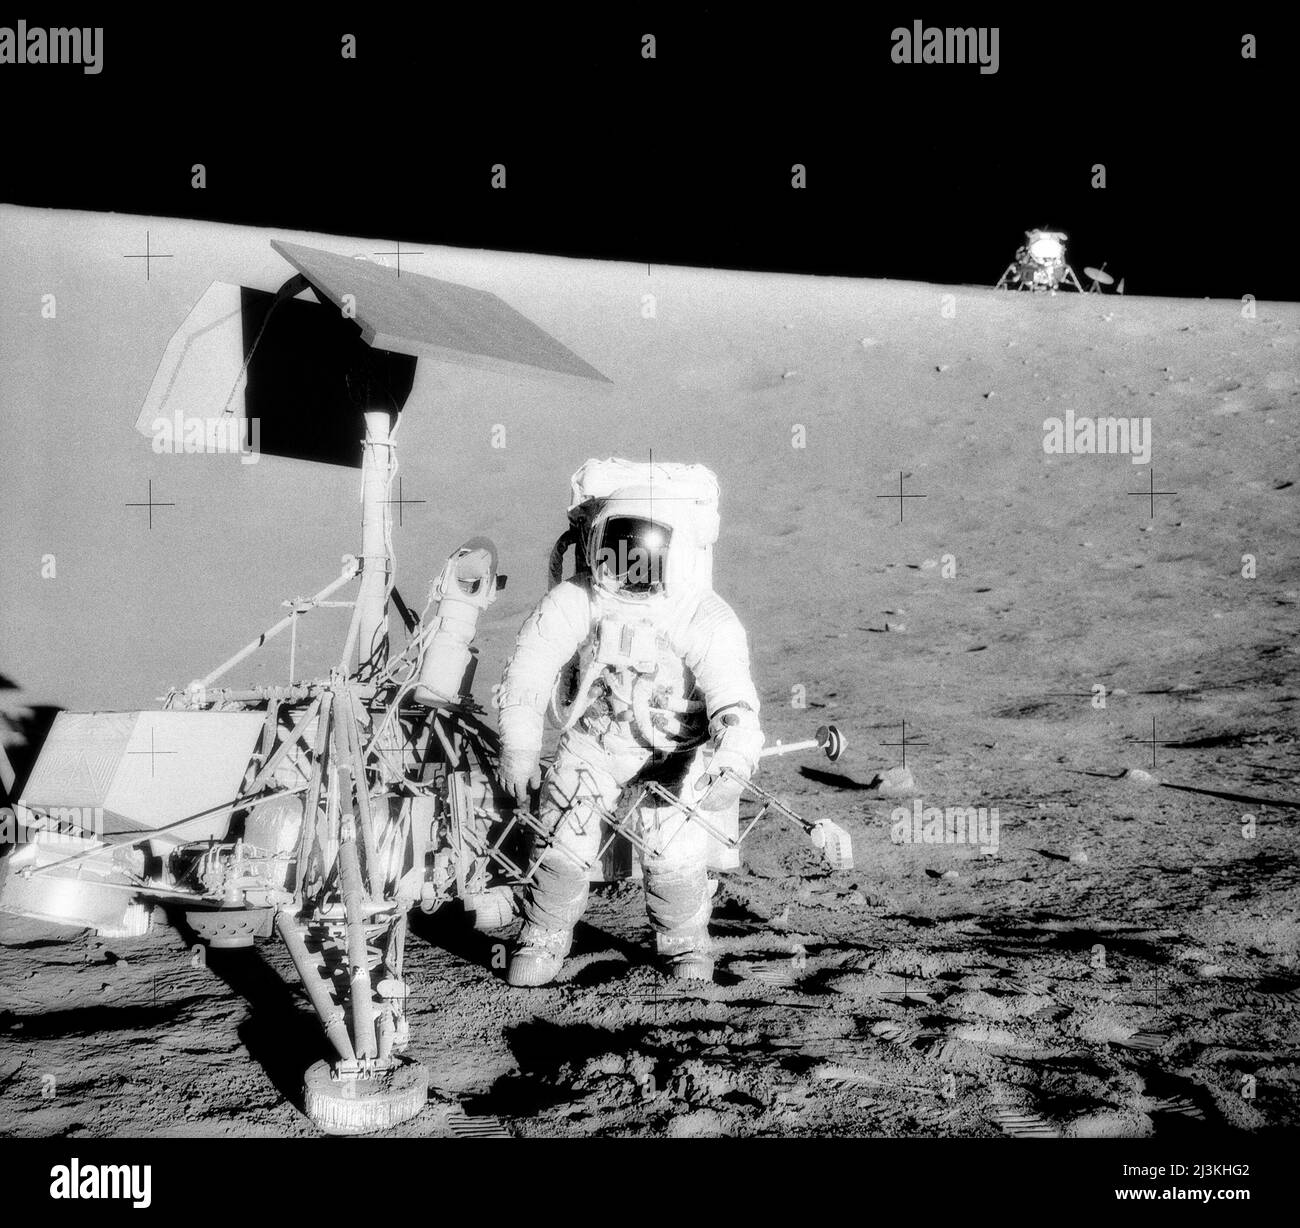 Charles Conrad, Apollo 12 Commander, examining the unmanned Surveyor III spacecraft which landed on the moon in 1967. The Lunar Module (LM) 'Intrepid' is in the right background. This picture was taken by astronaut Alan Bean, Lunar Module pilot. The 'Intrepid' landed on the Moon's Ocean of Storms only 600 feet from Surveyor III. Stock Photo